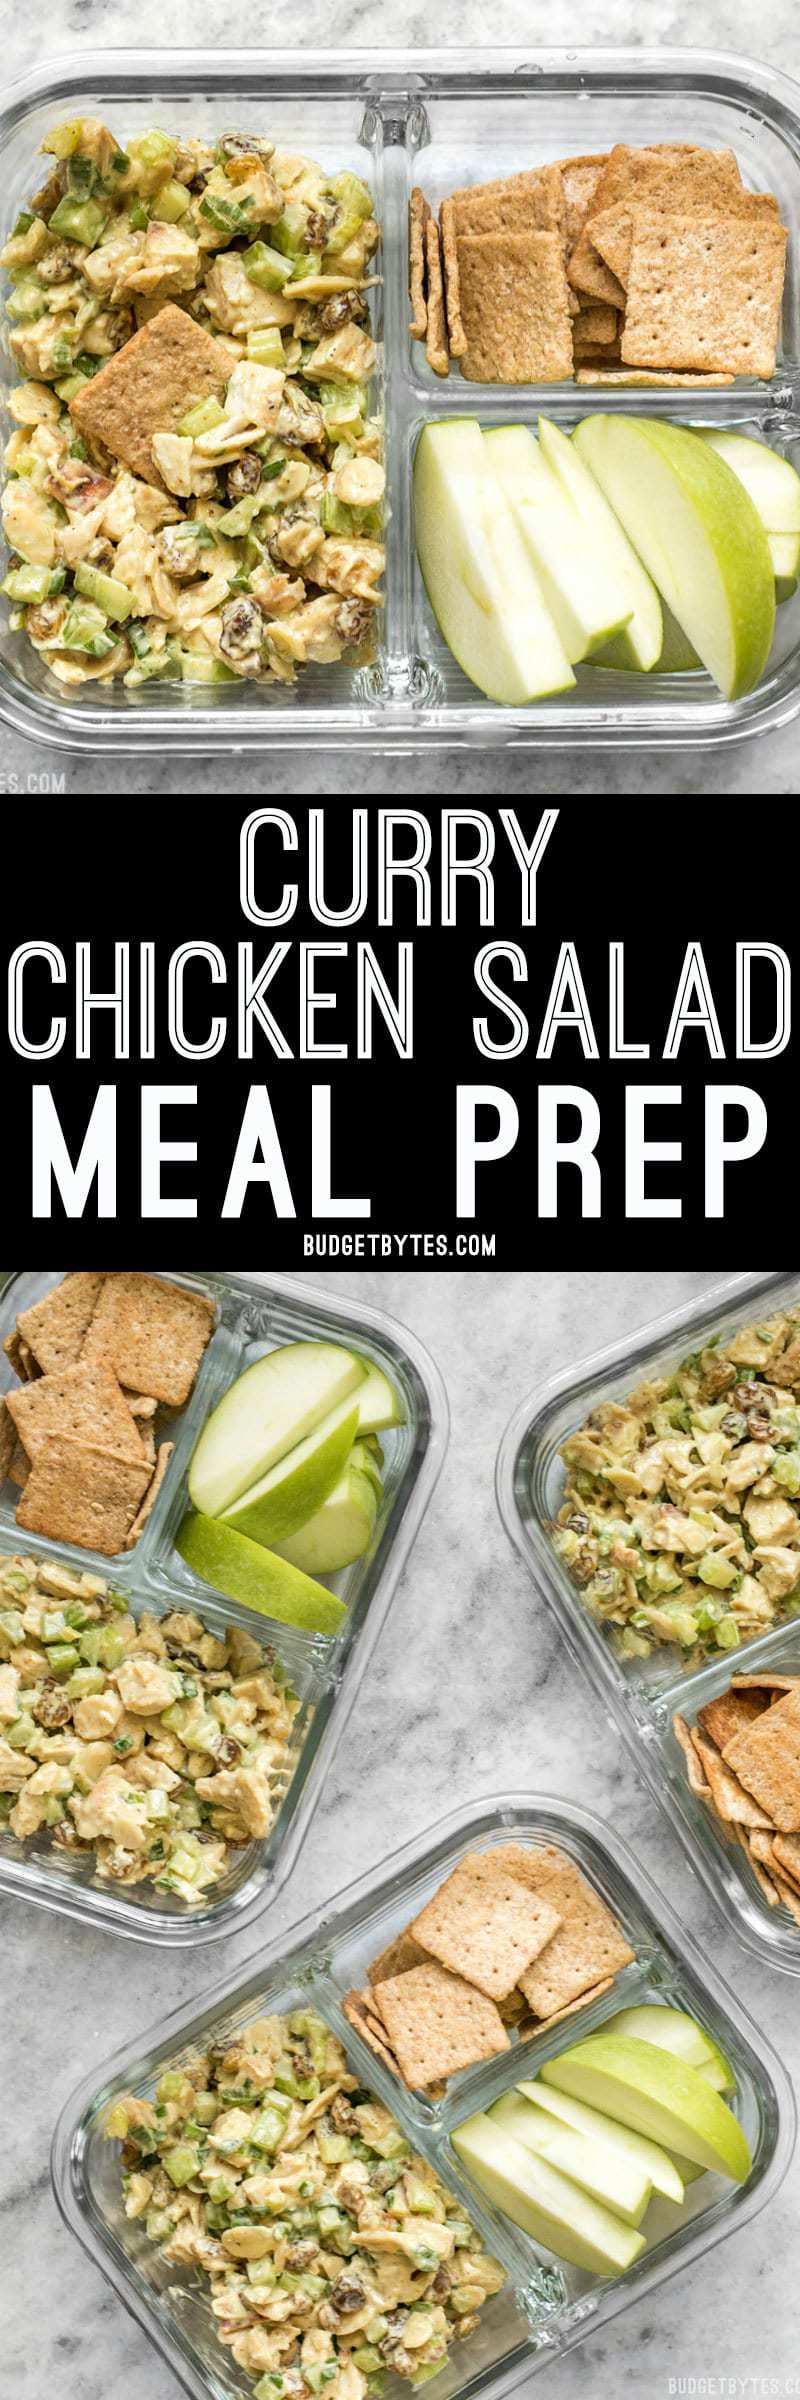 https://www.budgetbytes.com/wp-content/uploads/2017/09/Curry-Chicken-Salad-Meal-Prep-Collage.jpg